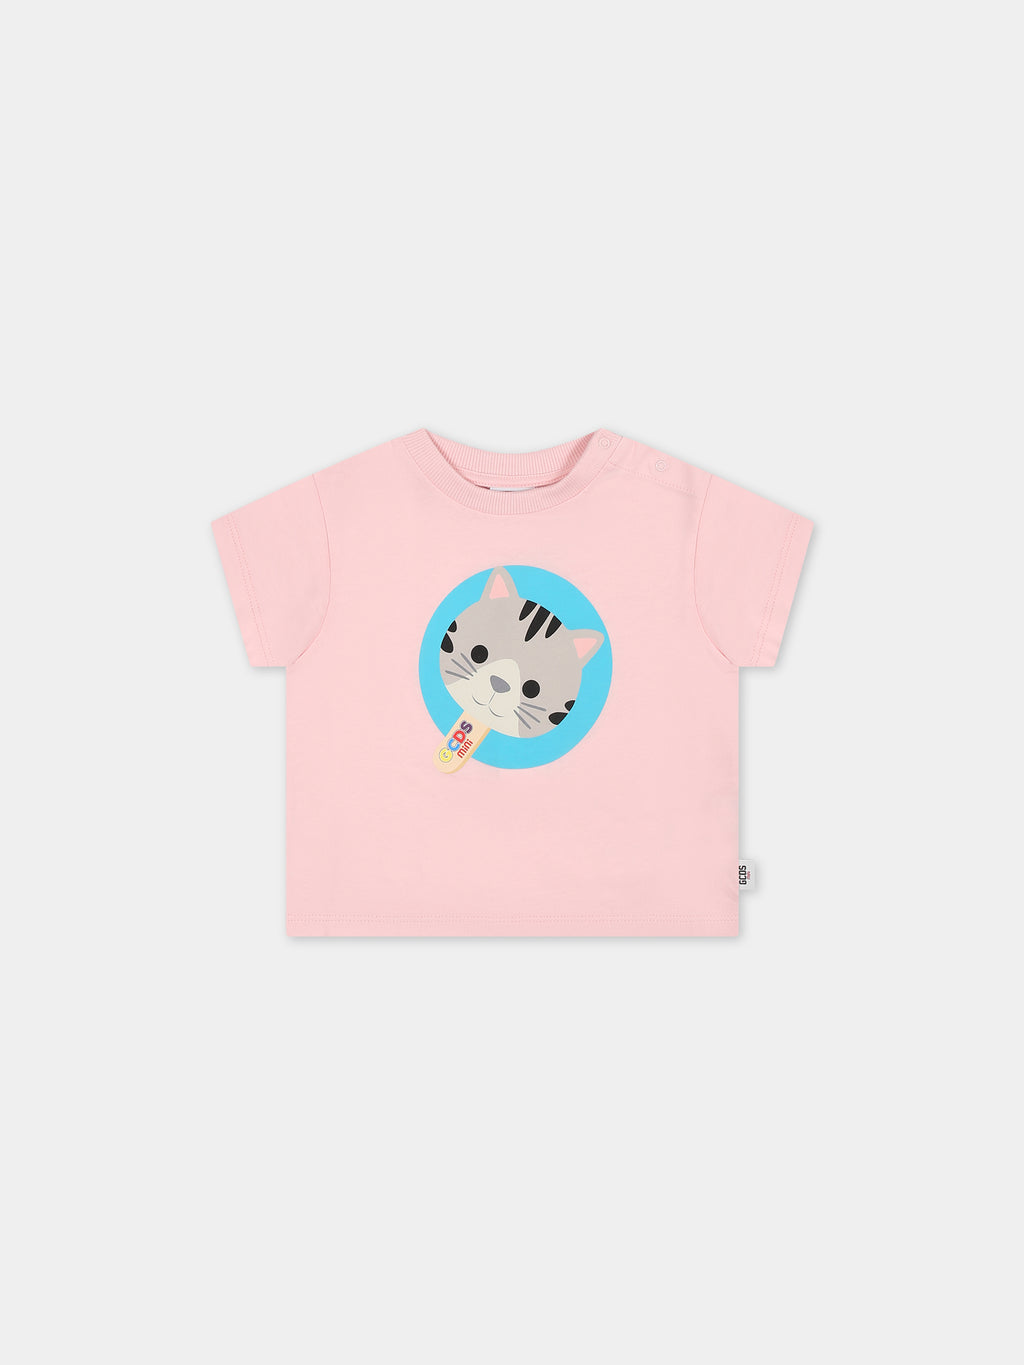 Pink t-shirt for baby girl with kitten